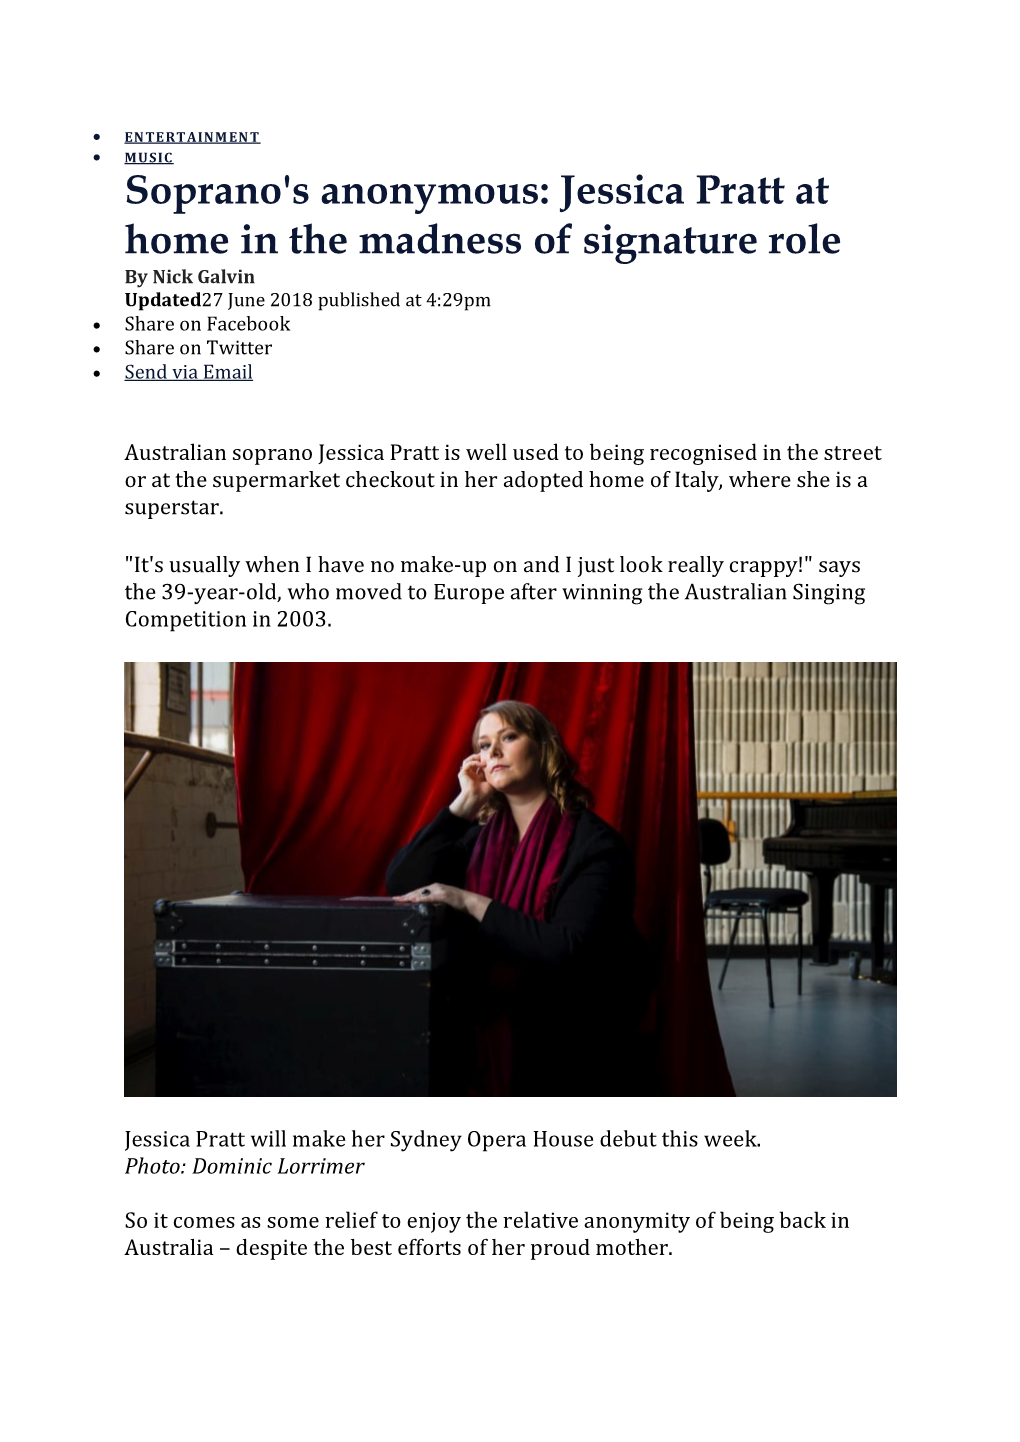 Soprano's Anonymous: Jessica Pratt at Home in the Madness Of